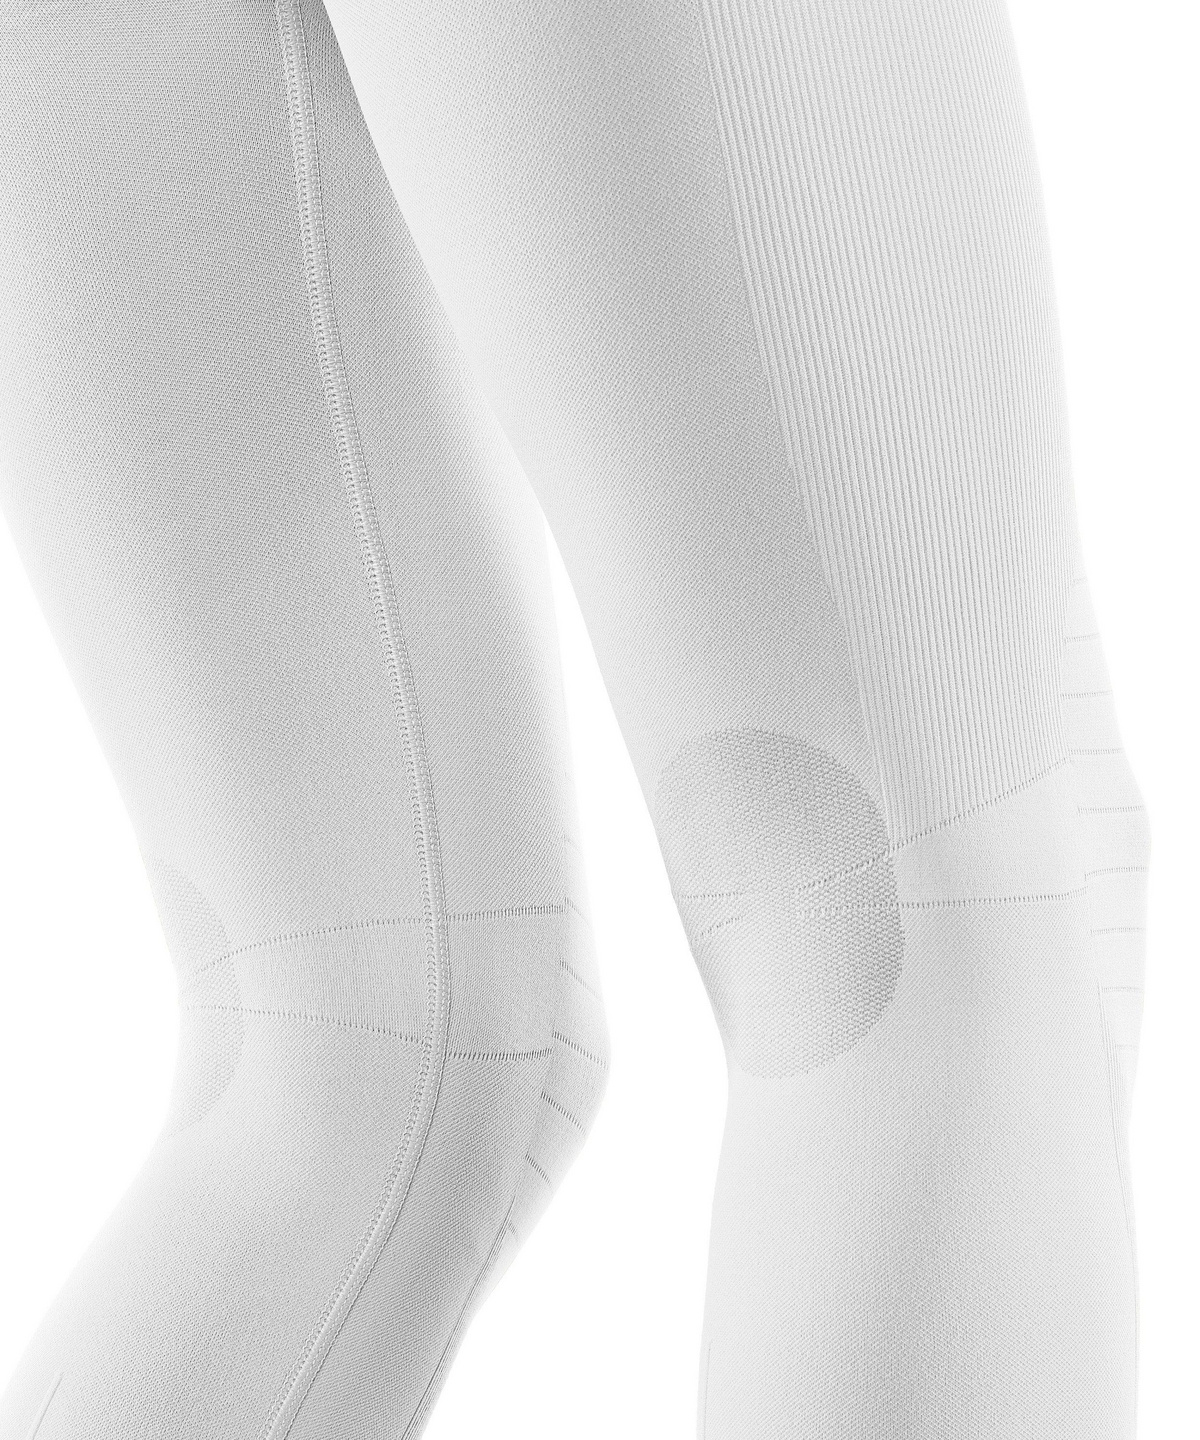 Sizes XS-XL protection in cold to very cold temperatures Sweat wicking warm FALKE ESS Women Maximum Warm 3/4 tights multiple colours fast drying polyamide mix 